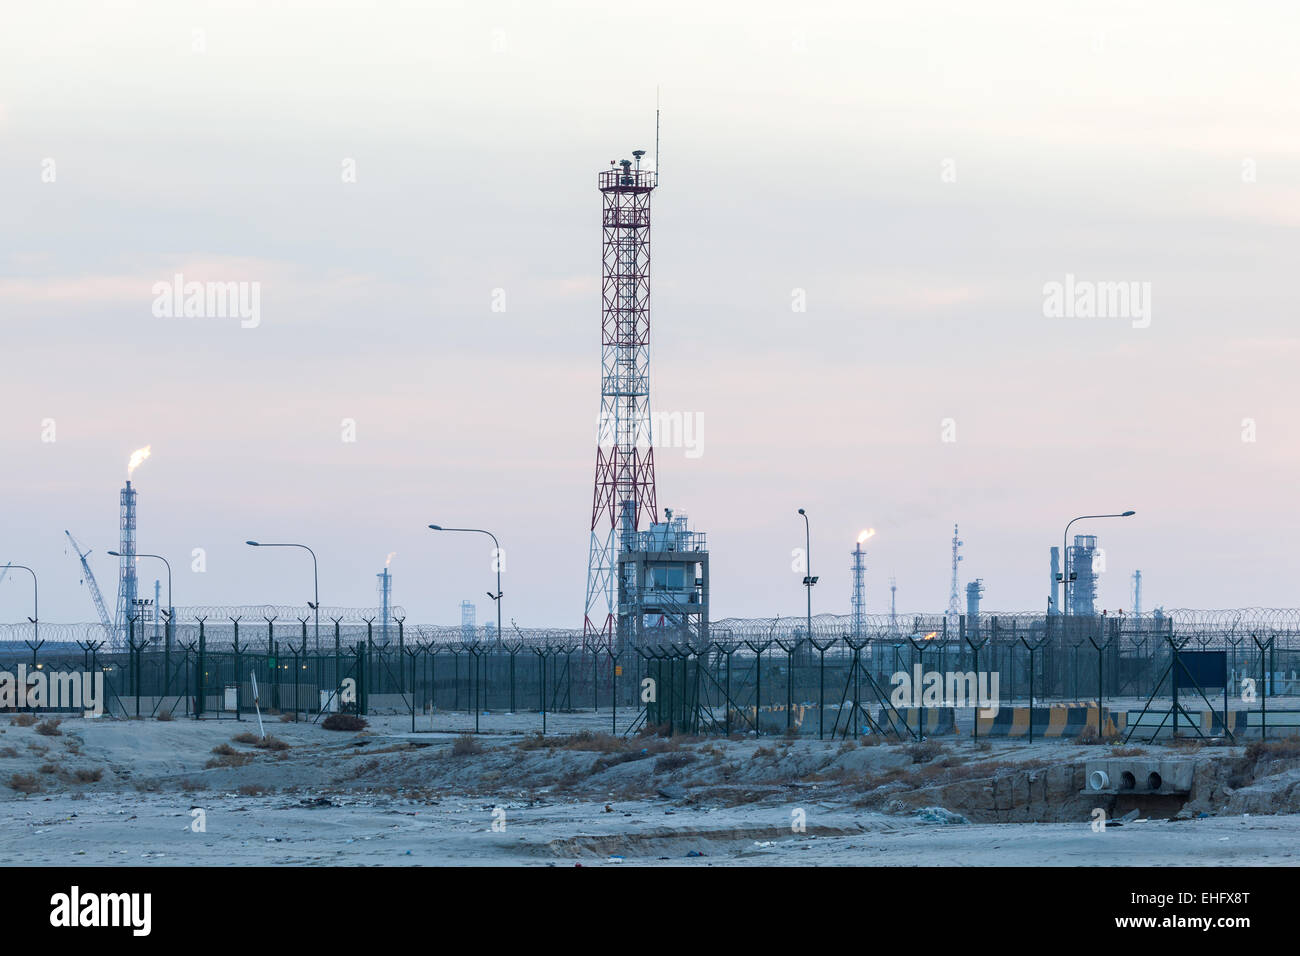 Oil and gas industry field in Kuwait, Middle East Stock Photo